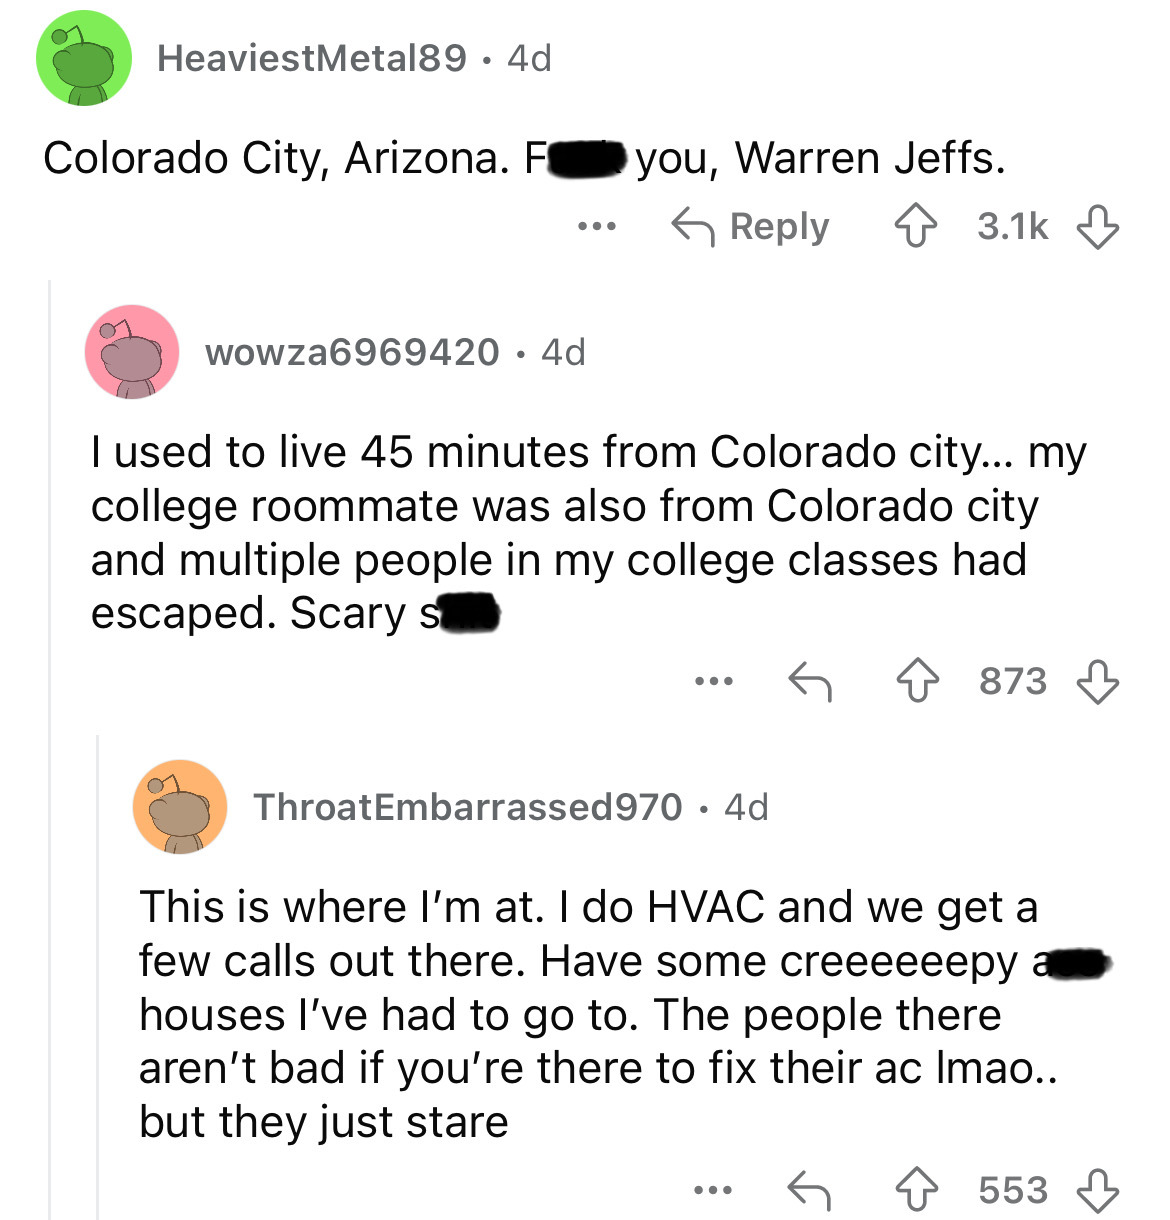 screenshot - Heaviest Metal89. 4d Colorado City, Arizona. F ... you, Warren Jeffs. wowza6969420 4d I used to live 45 minutes from Colorado city... my college roommate was also from Colorado city and multiple people in my college classes had escaped. Scary